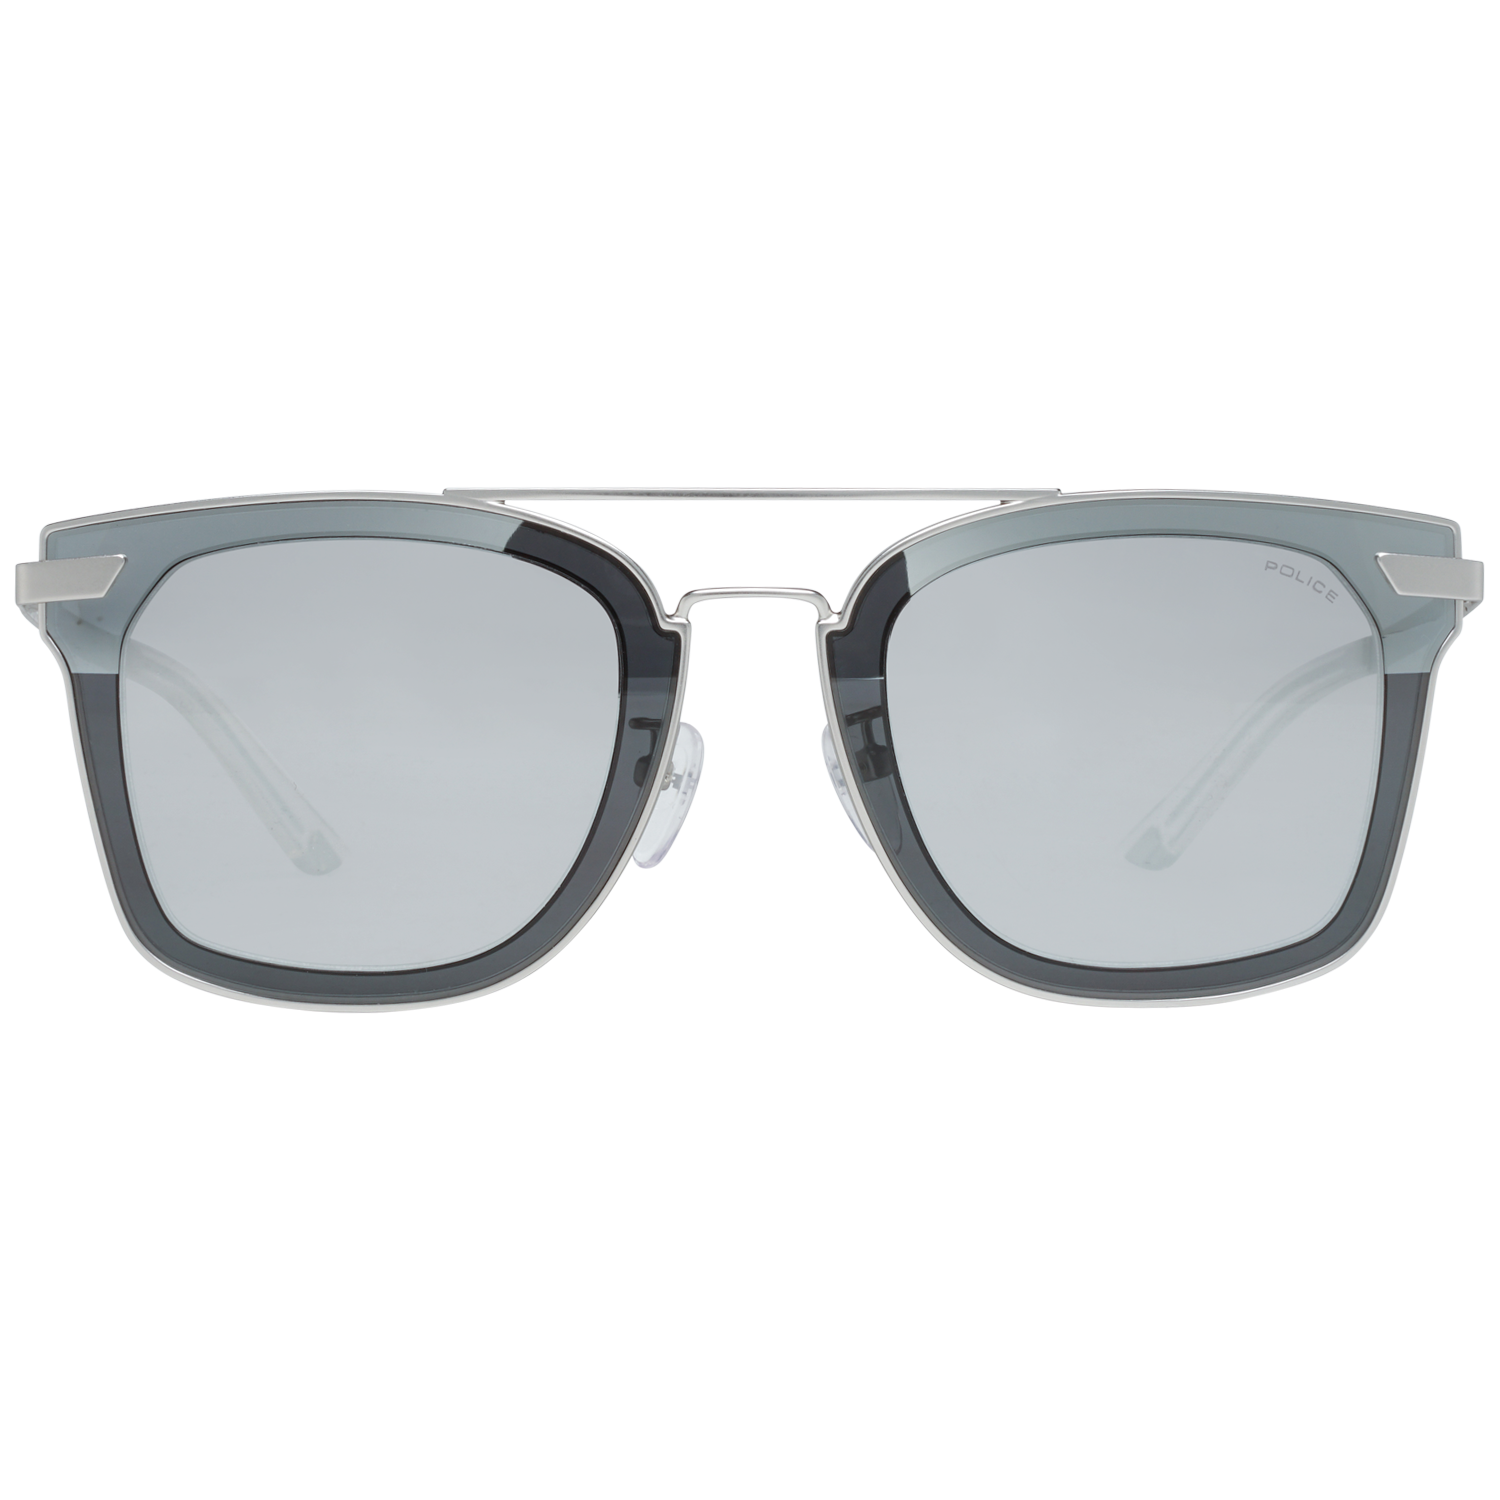 Police Sunglasses SPL348 581X 49 Men
Frame color: Silver
Lenses color: Silver
Lenses material: Plastic
Filter category: 3
Style: Square
Lenses effect: Mirrored
Protection: 100% UVA & UVB
Lenses width: 49
Lenses height: 42
Bridge width: 24
Frame width: 143
Temples length: 145
Shipment includes: Case, cleaning cloth
Spring hinge: No